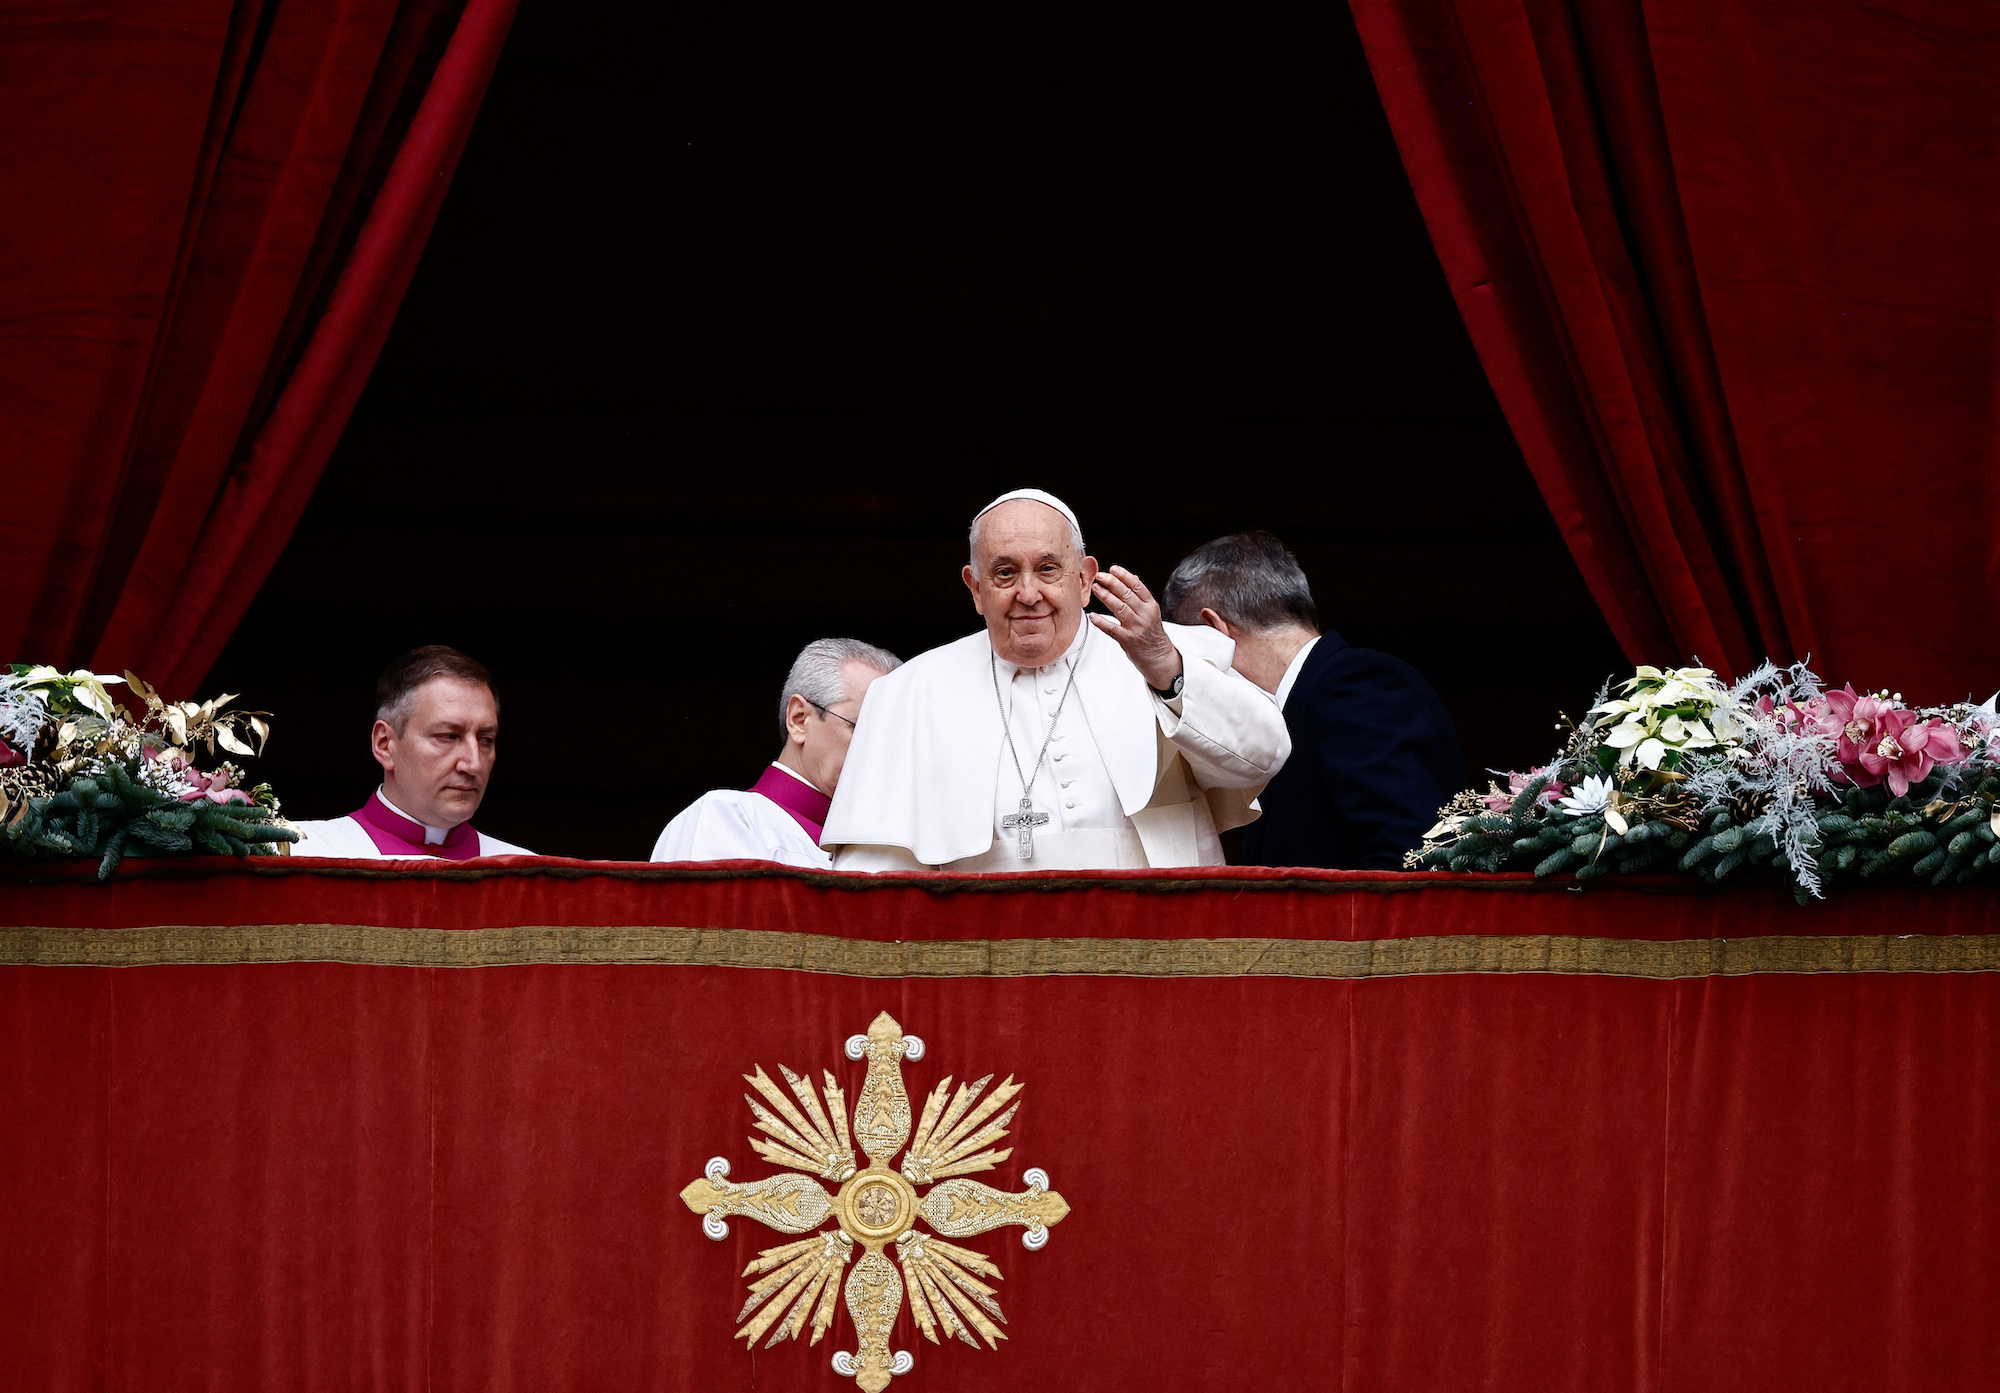 Pope Francis delivers his traditional Christmas Day message from the balcony of St. Peter's Basilica at the Vatican on Monday.